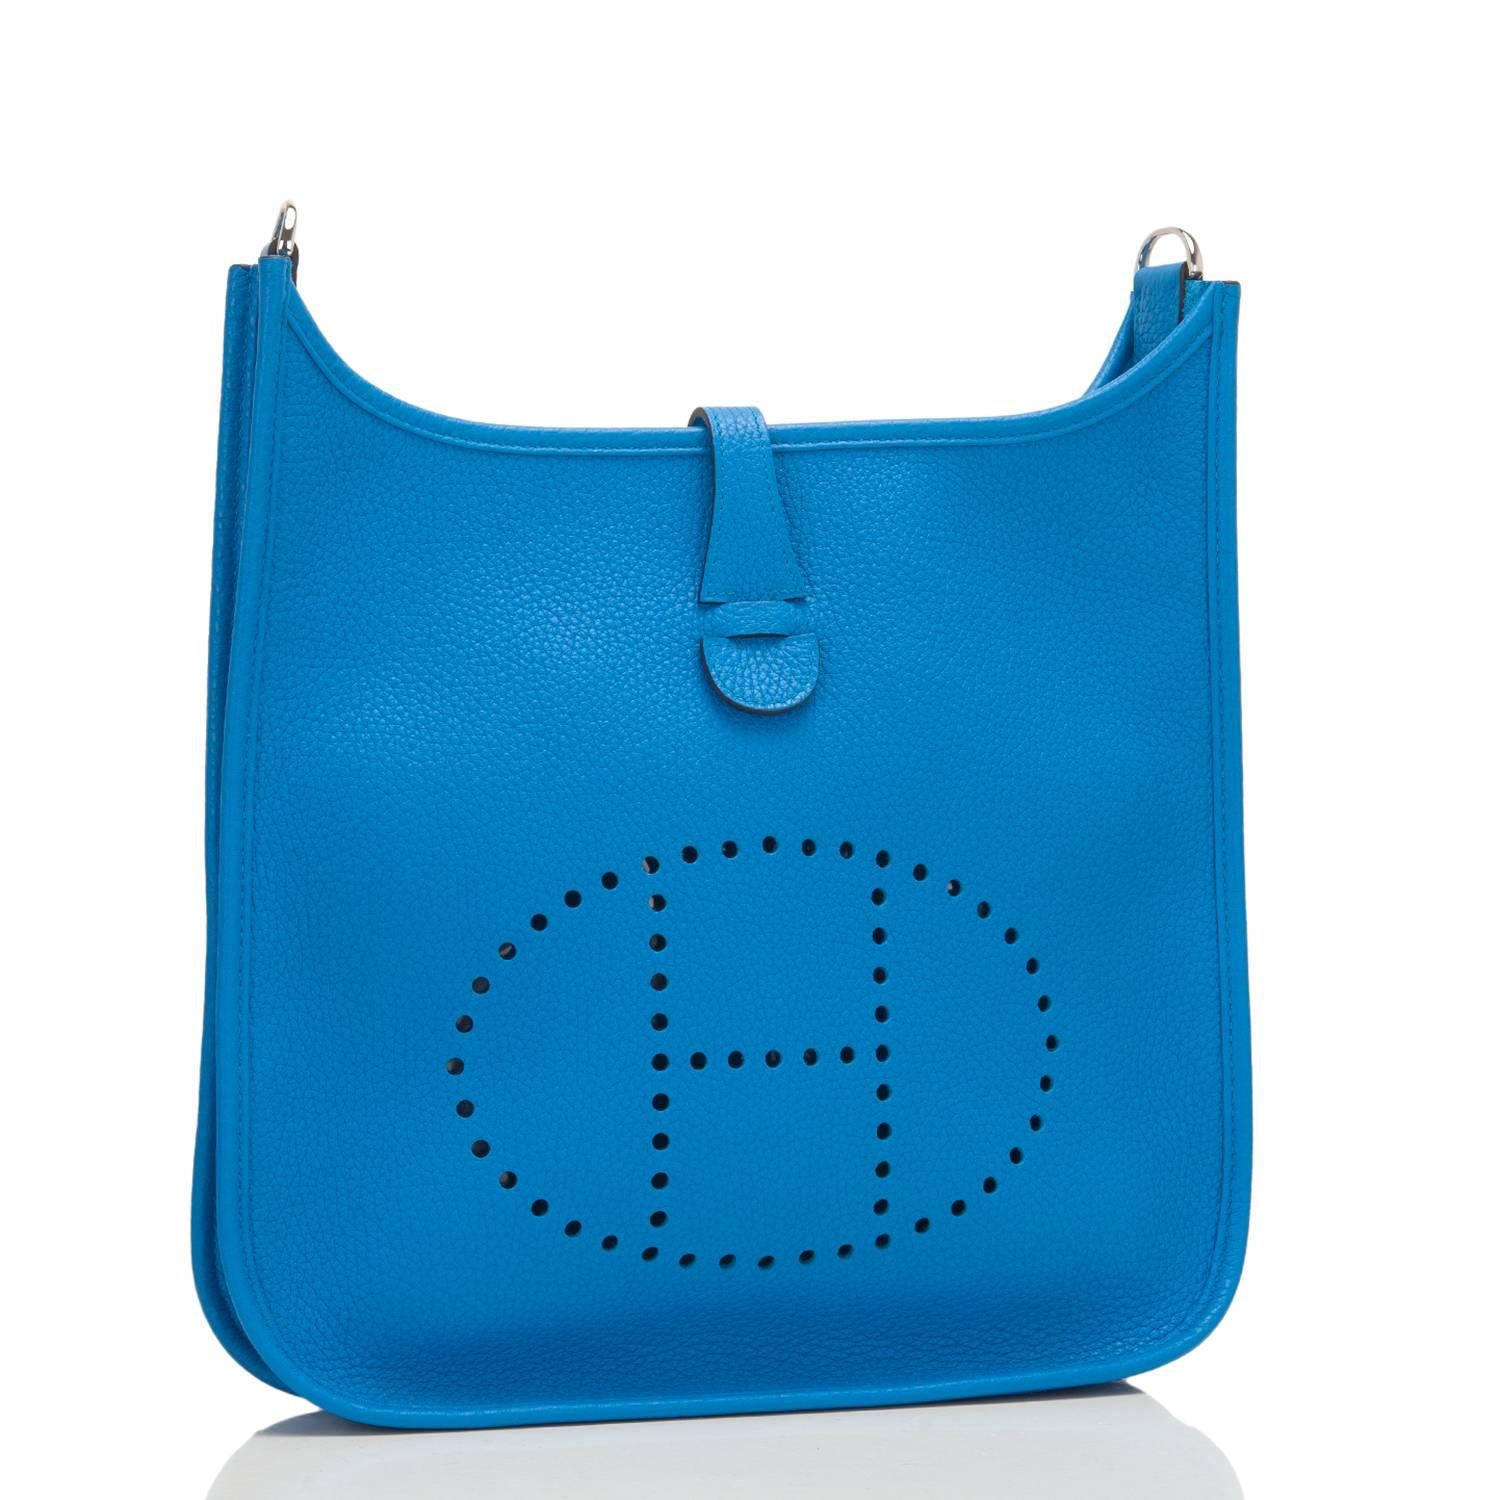 Hermes Evelyne PM of Blue Zanzibar clemence leather with palladium hardware.

This Evelyne has tonal stitching, a large perforated H icon in circle at front, a rear pocket, a pull tab top closure that has a snap closure at the rear, and a Blue